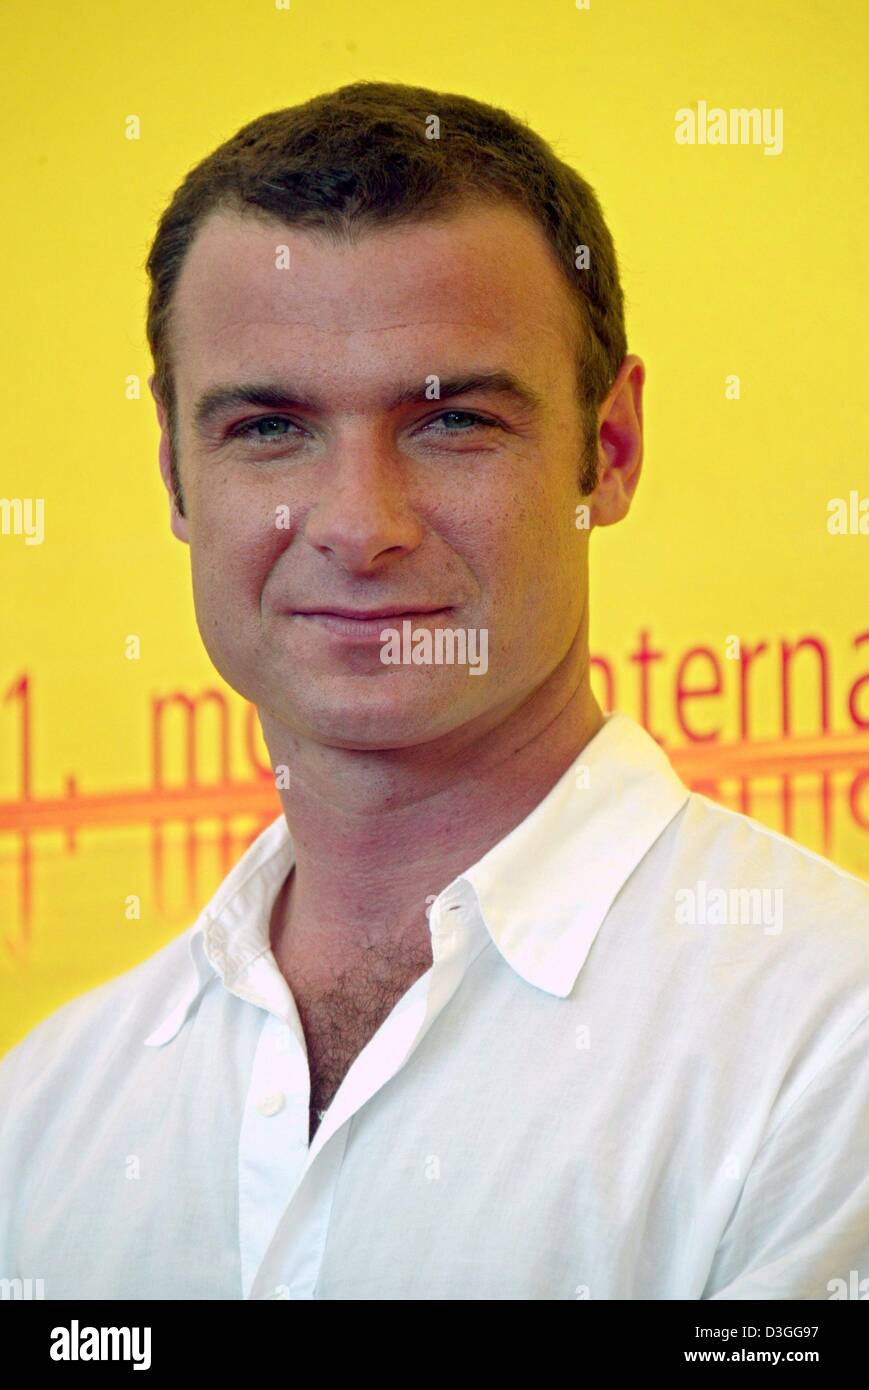 (dpa) - Actor Liev Schreiber presents his film 'The Manchurian Candidate' at the 61st International Exhibition of Cinema Art, better known as Venice Film Festival, Italy, 2 September 2004. Stock Photo